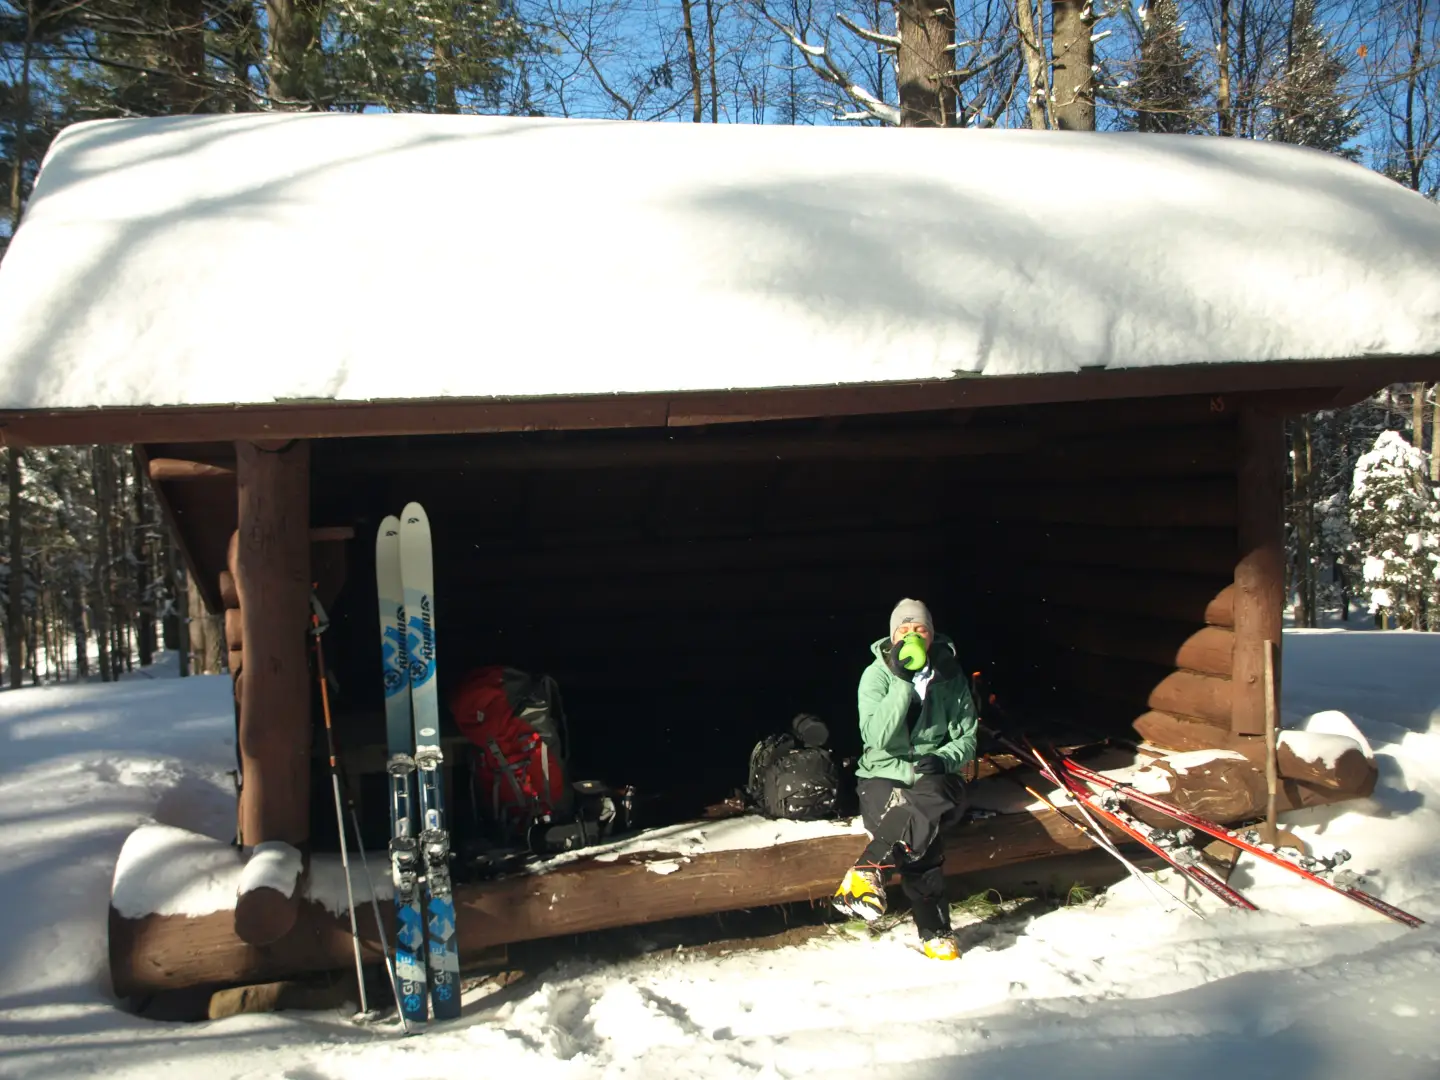 Nordic skiing in the ADK Hub - Five easy to moderate locations